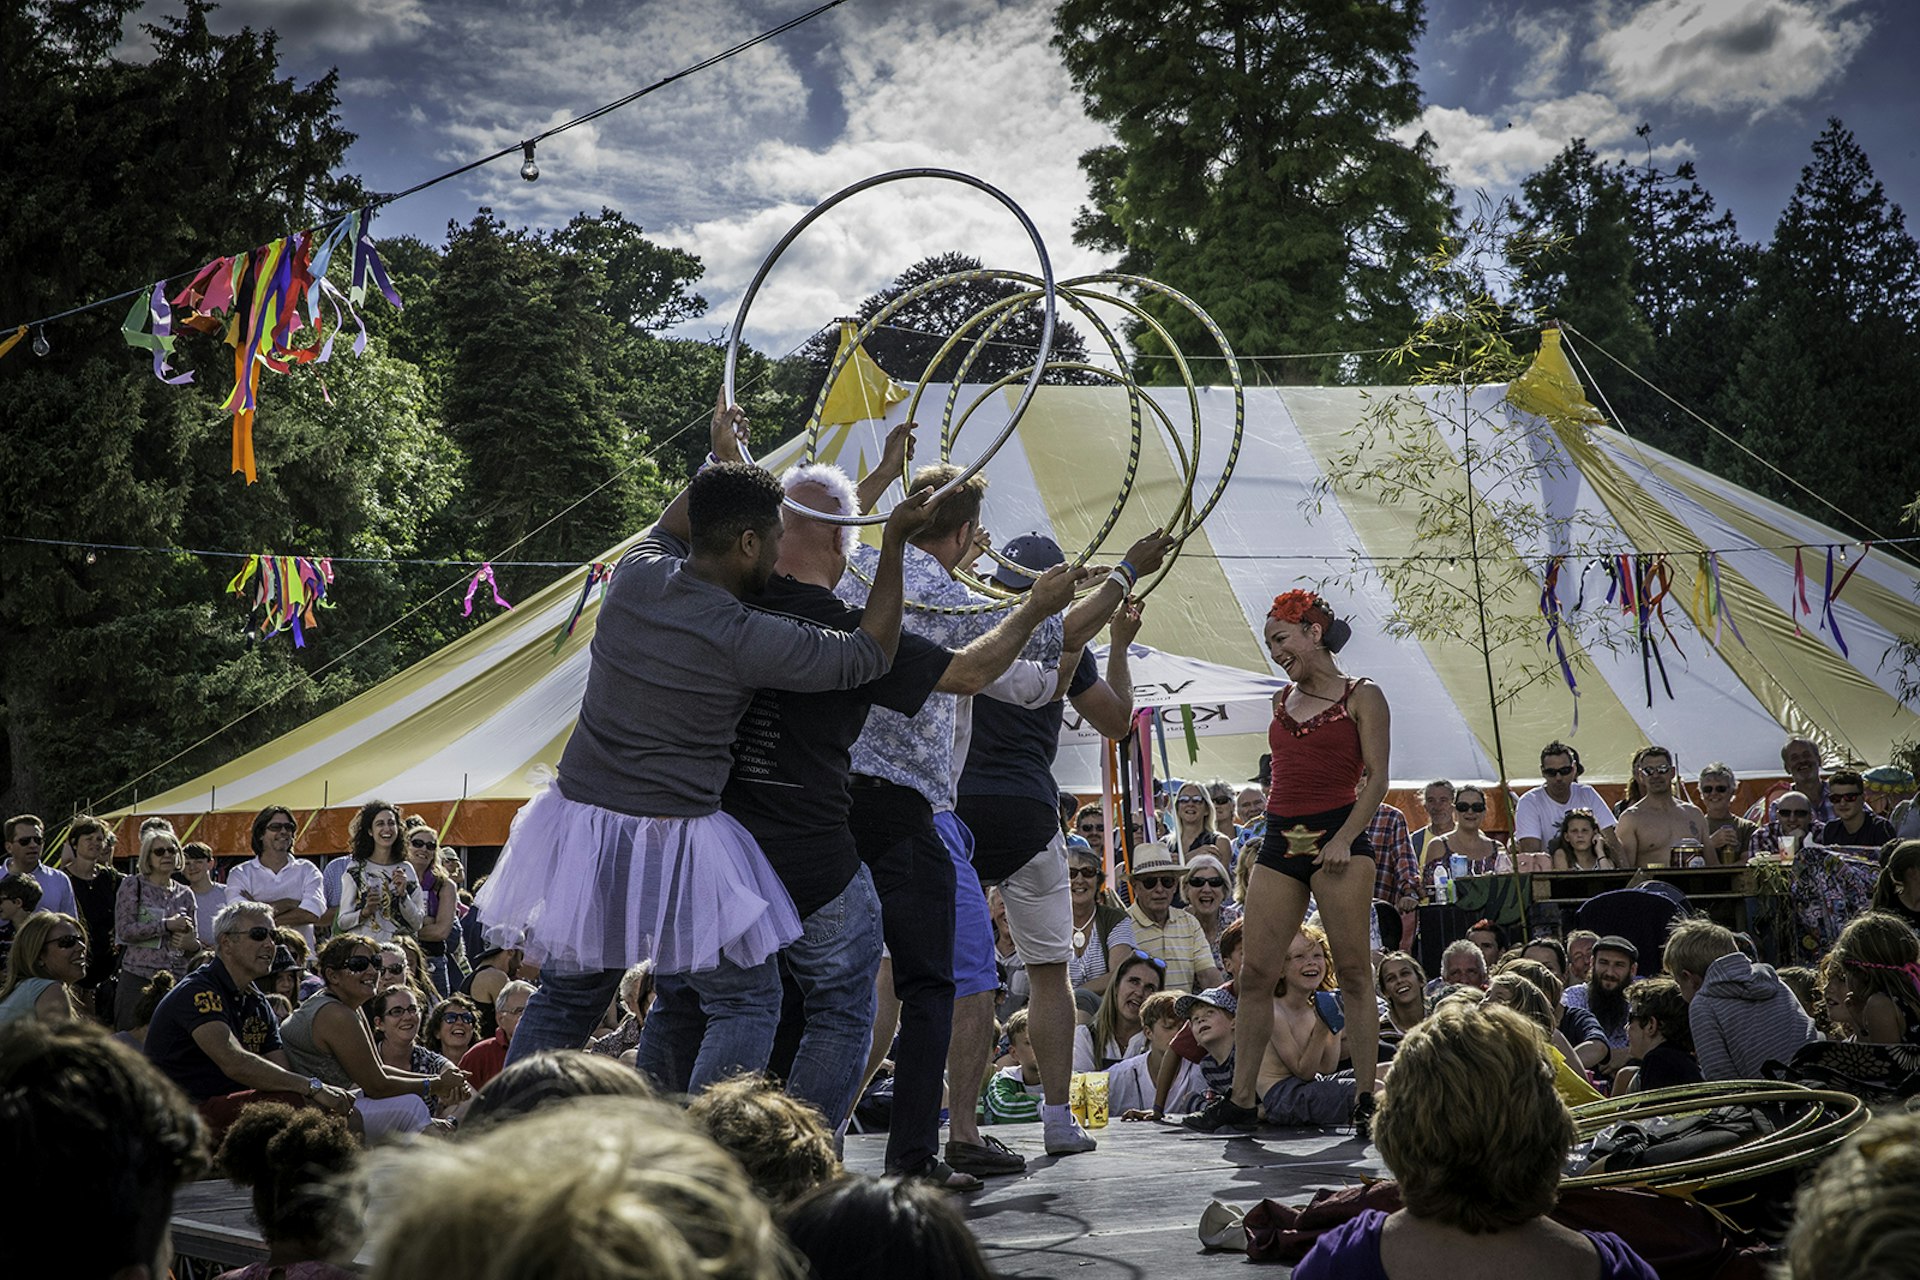 Performers entertaining the crowd at the Port Eliot Festival, Cornwall © Barcroft Media / Getty Images